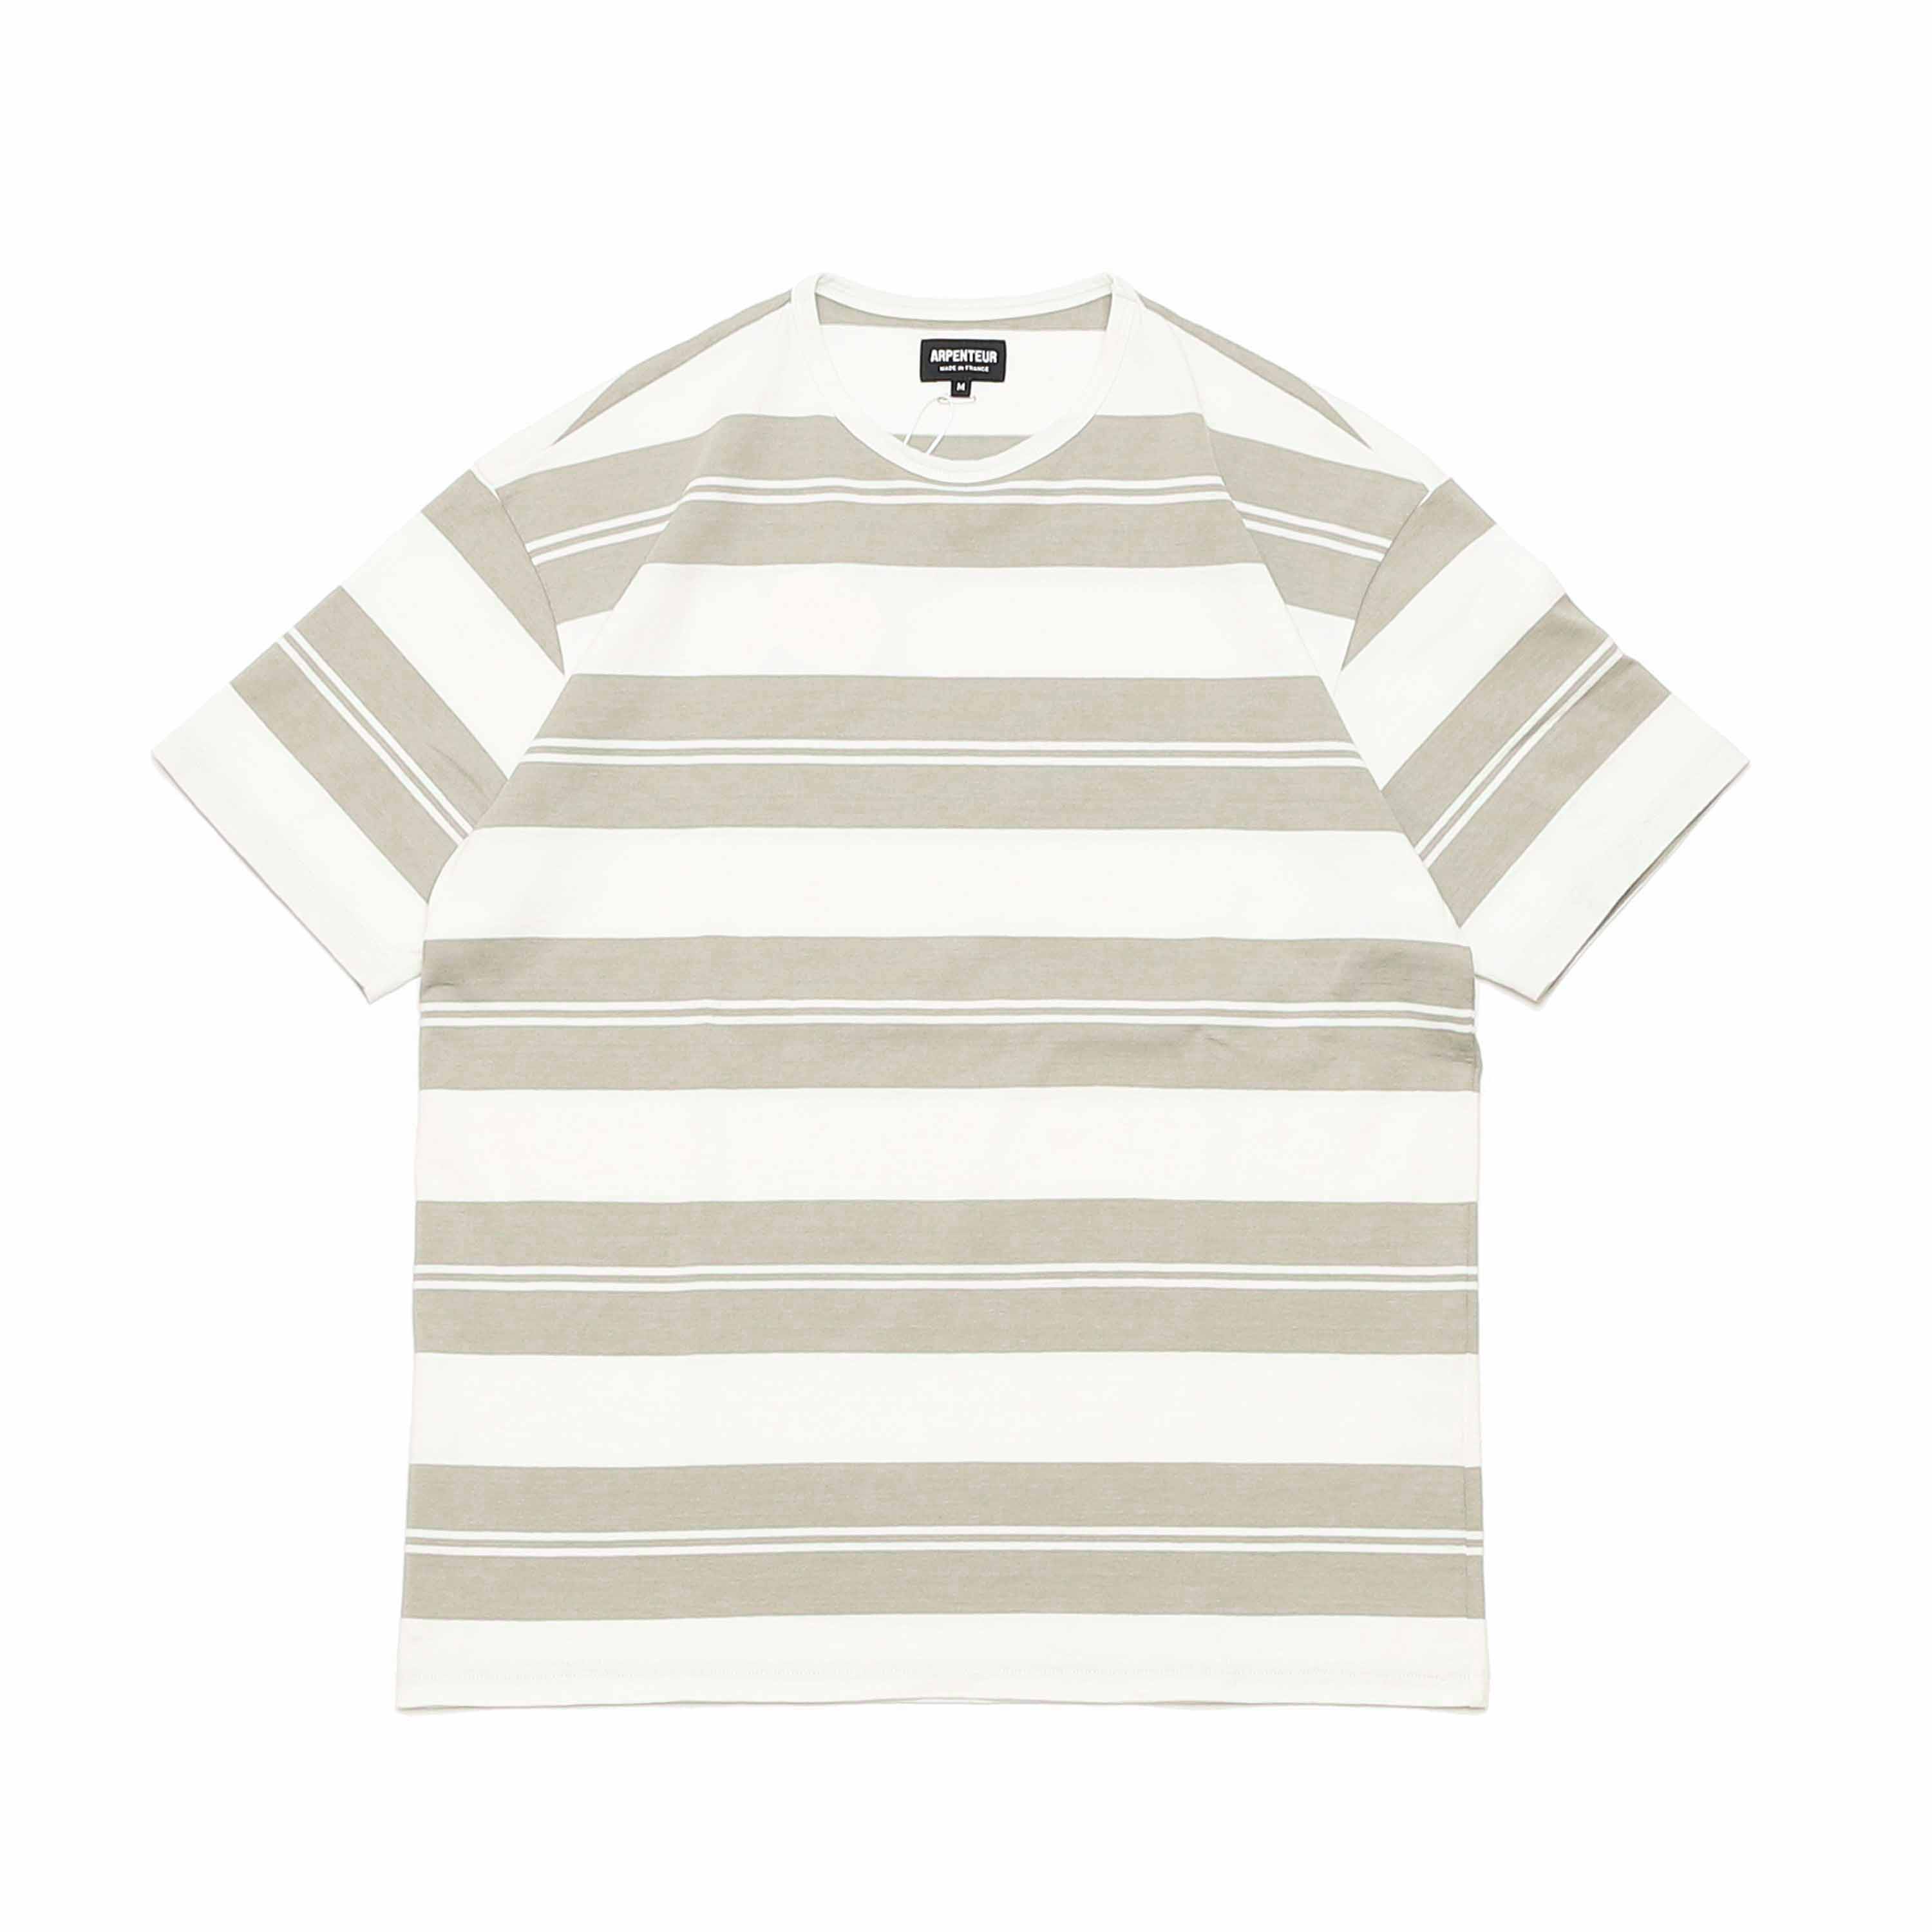 MATCH T-SHIRT - OFF WHITE / STONE RUGBY STRIPE